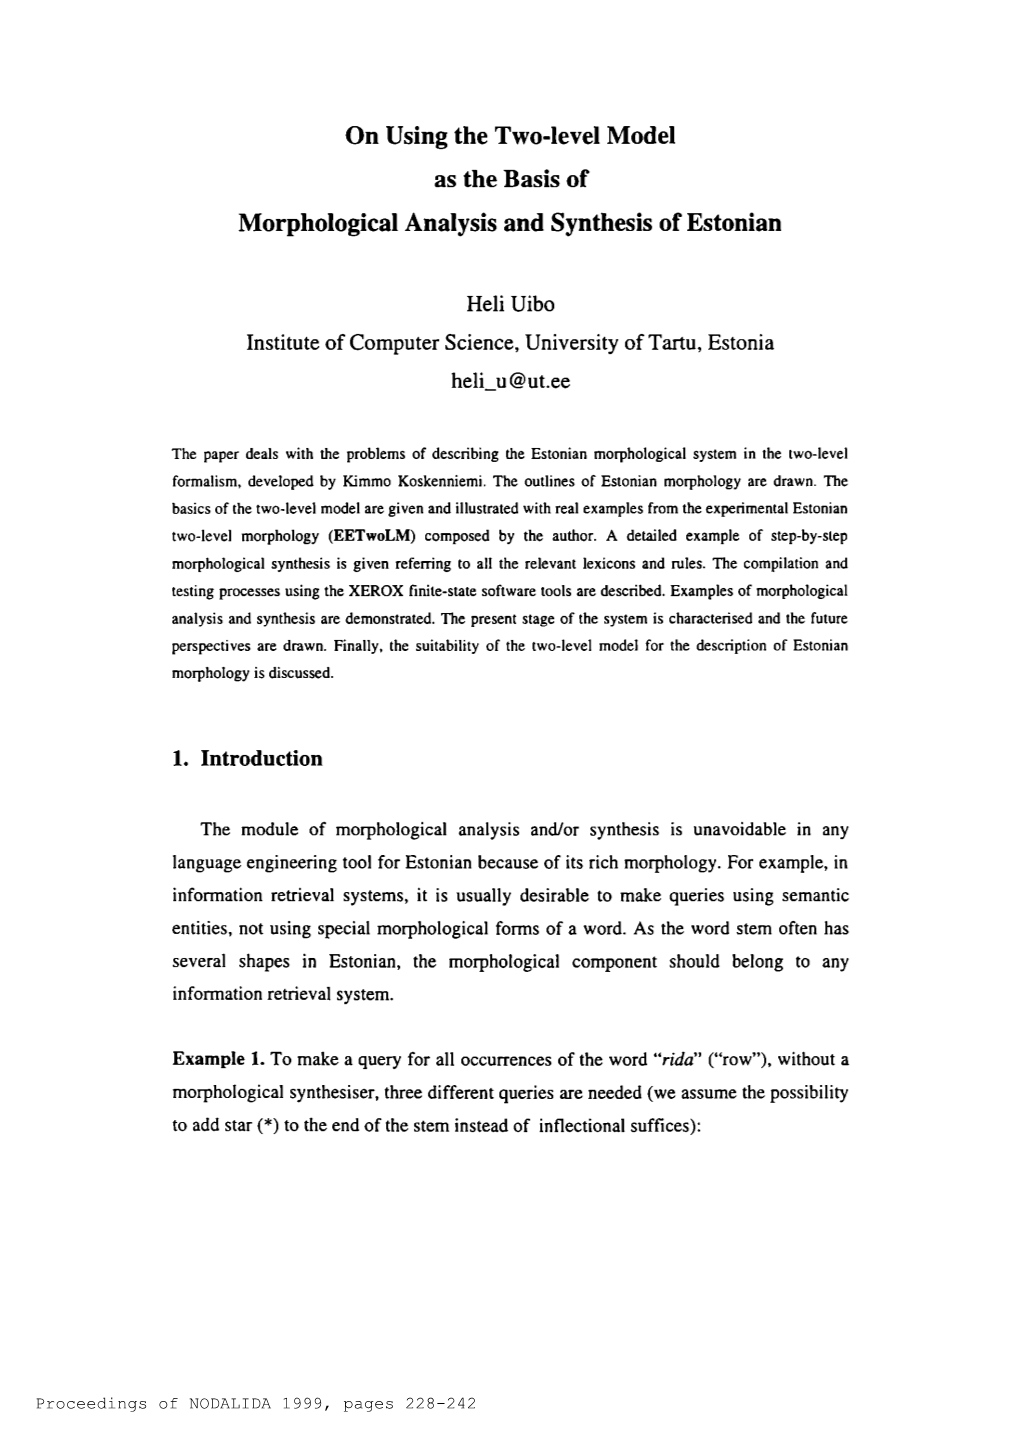 On Using the Two-Level Model As the Basis of Morphological Analysis and Synthesis of Estonian